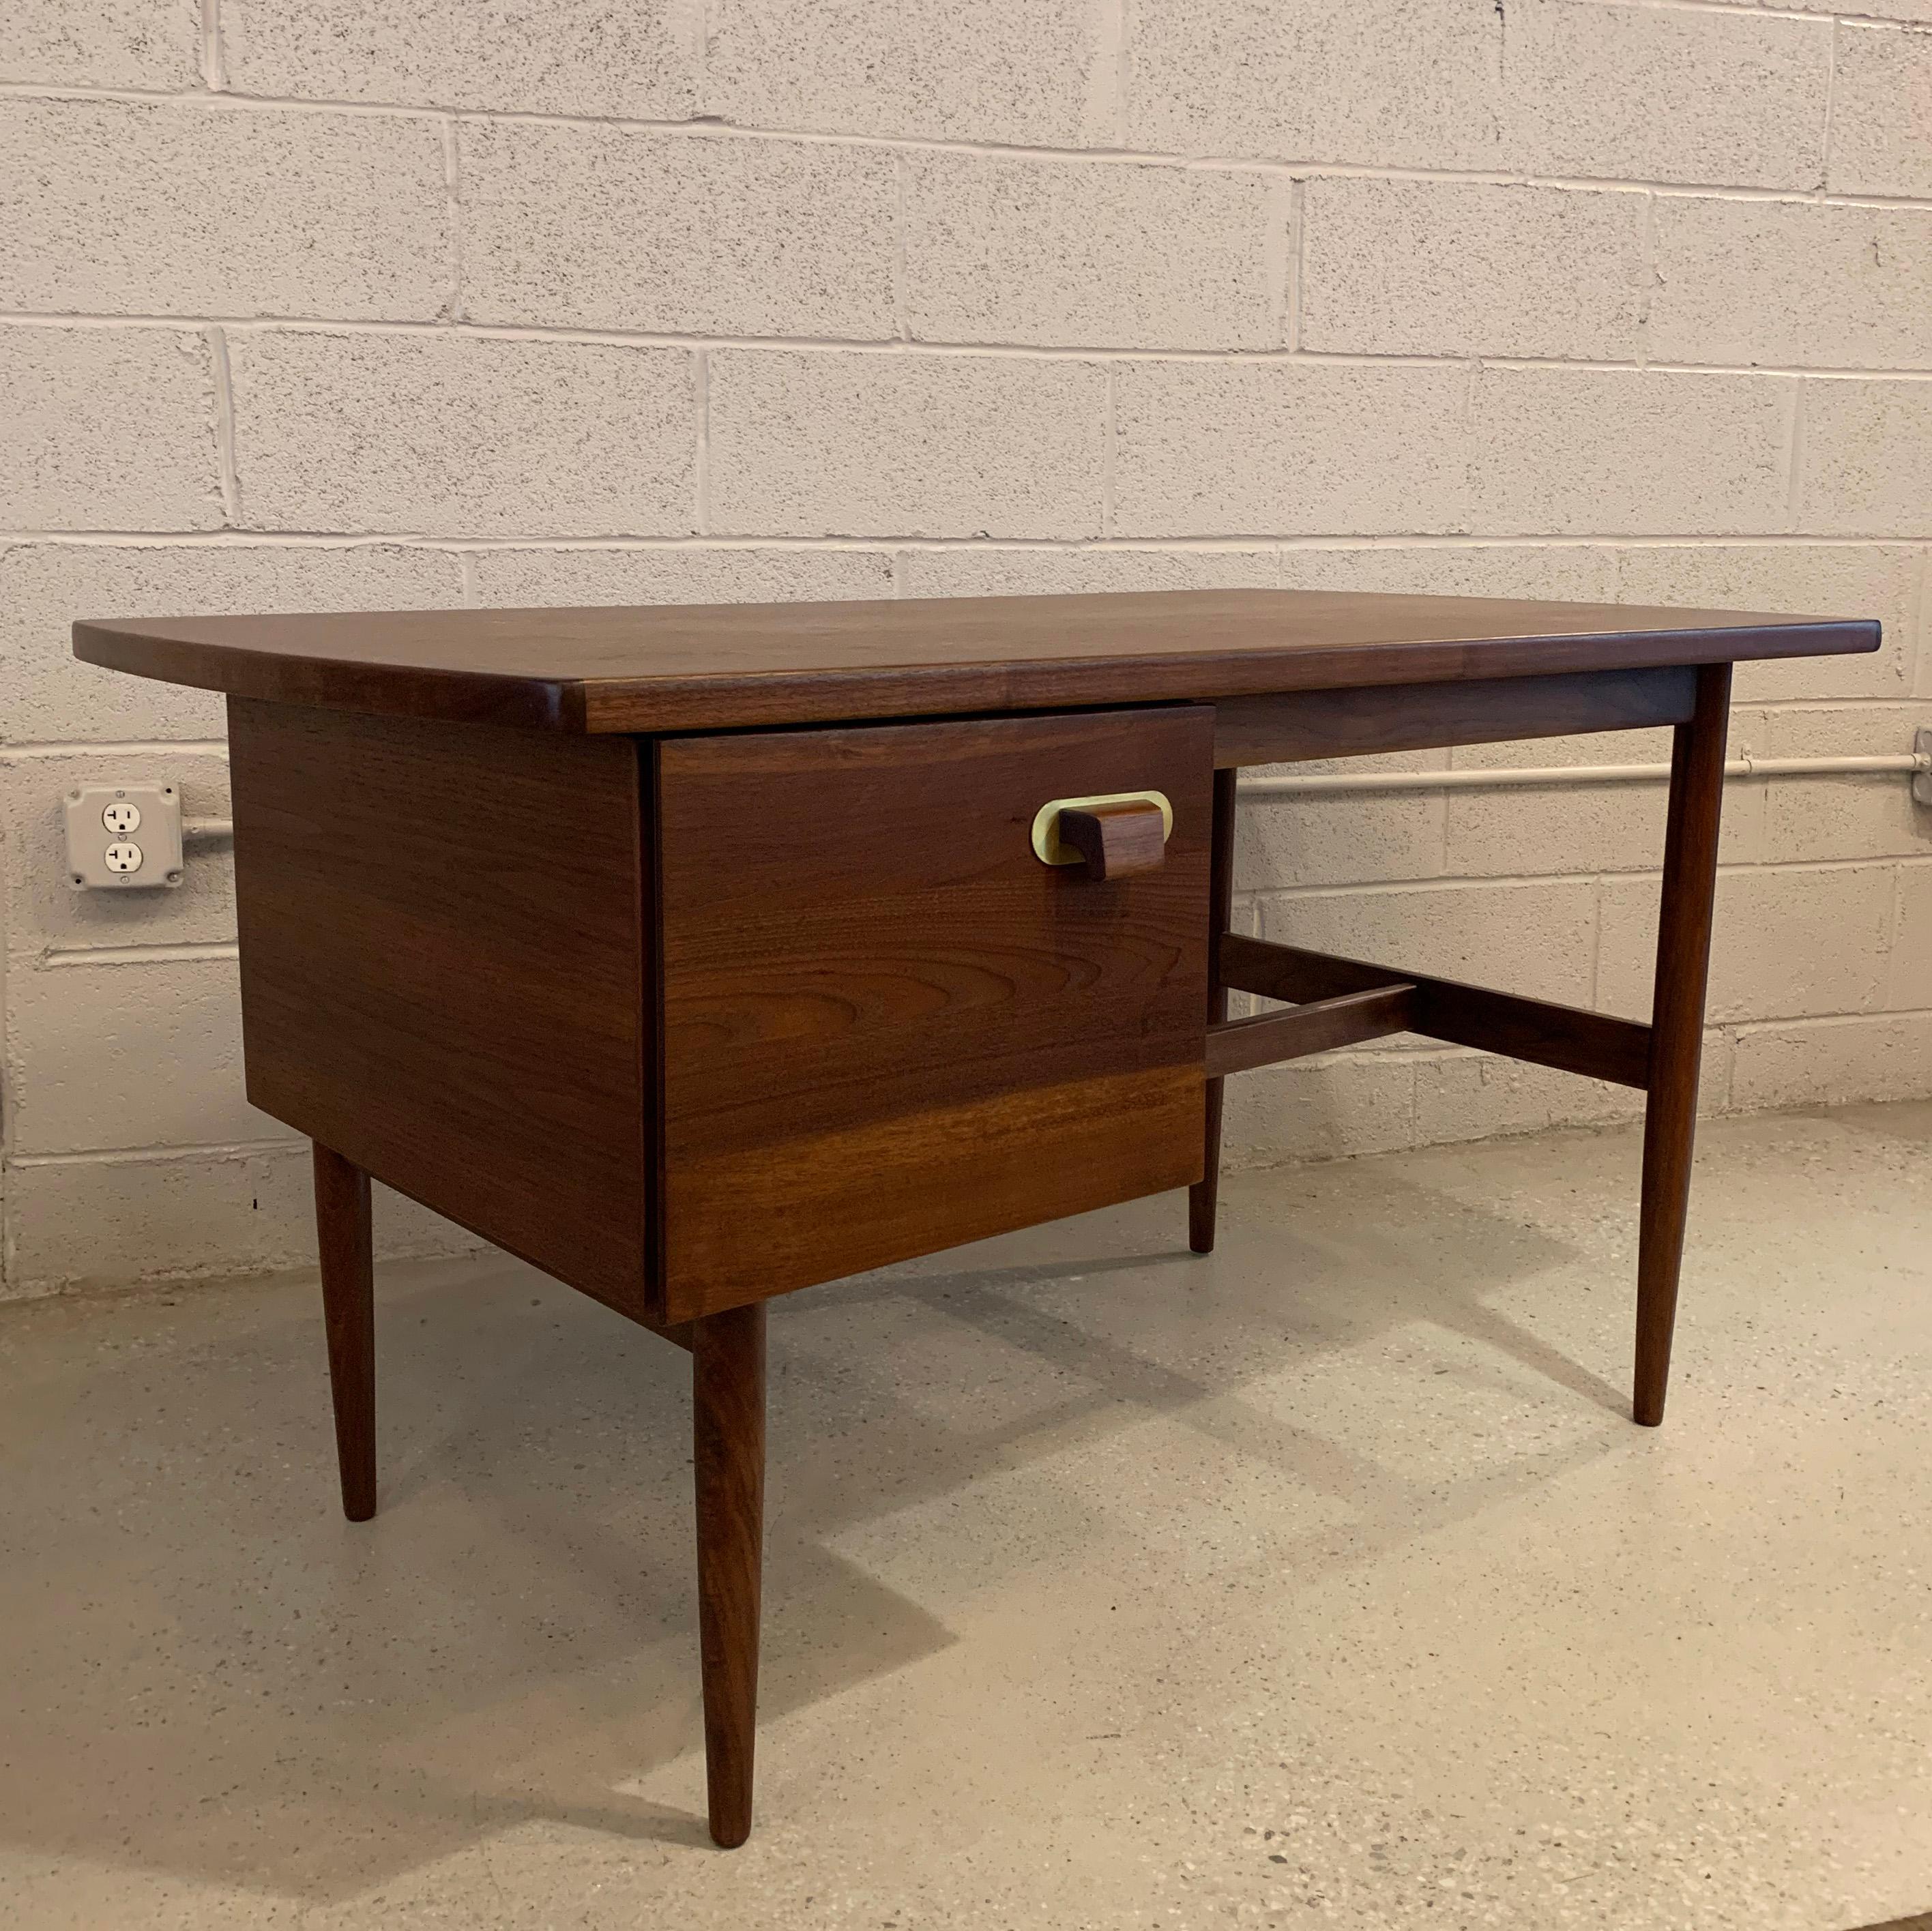 Small, walnut, Mid-Century Modern desk by Jens Risom features a side drawer with diagonal file slats and removable desk organizer with additional storage underneath. The handle features his signature brass backplate. The chair opening measures 24.5